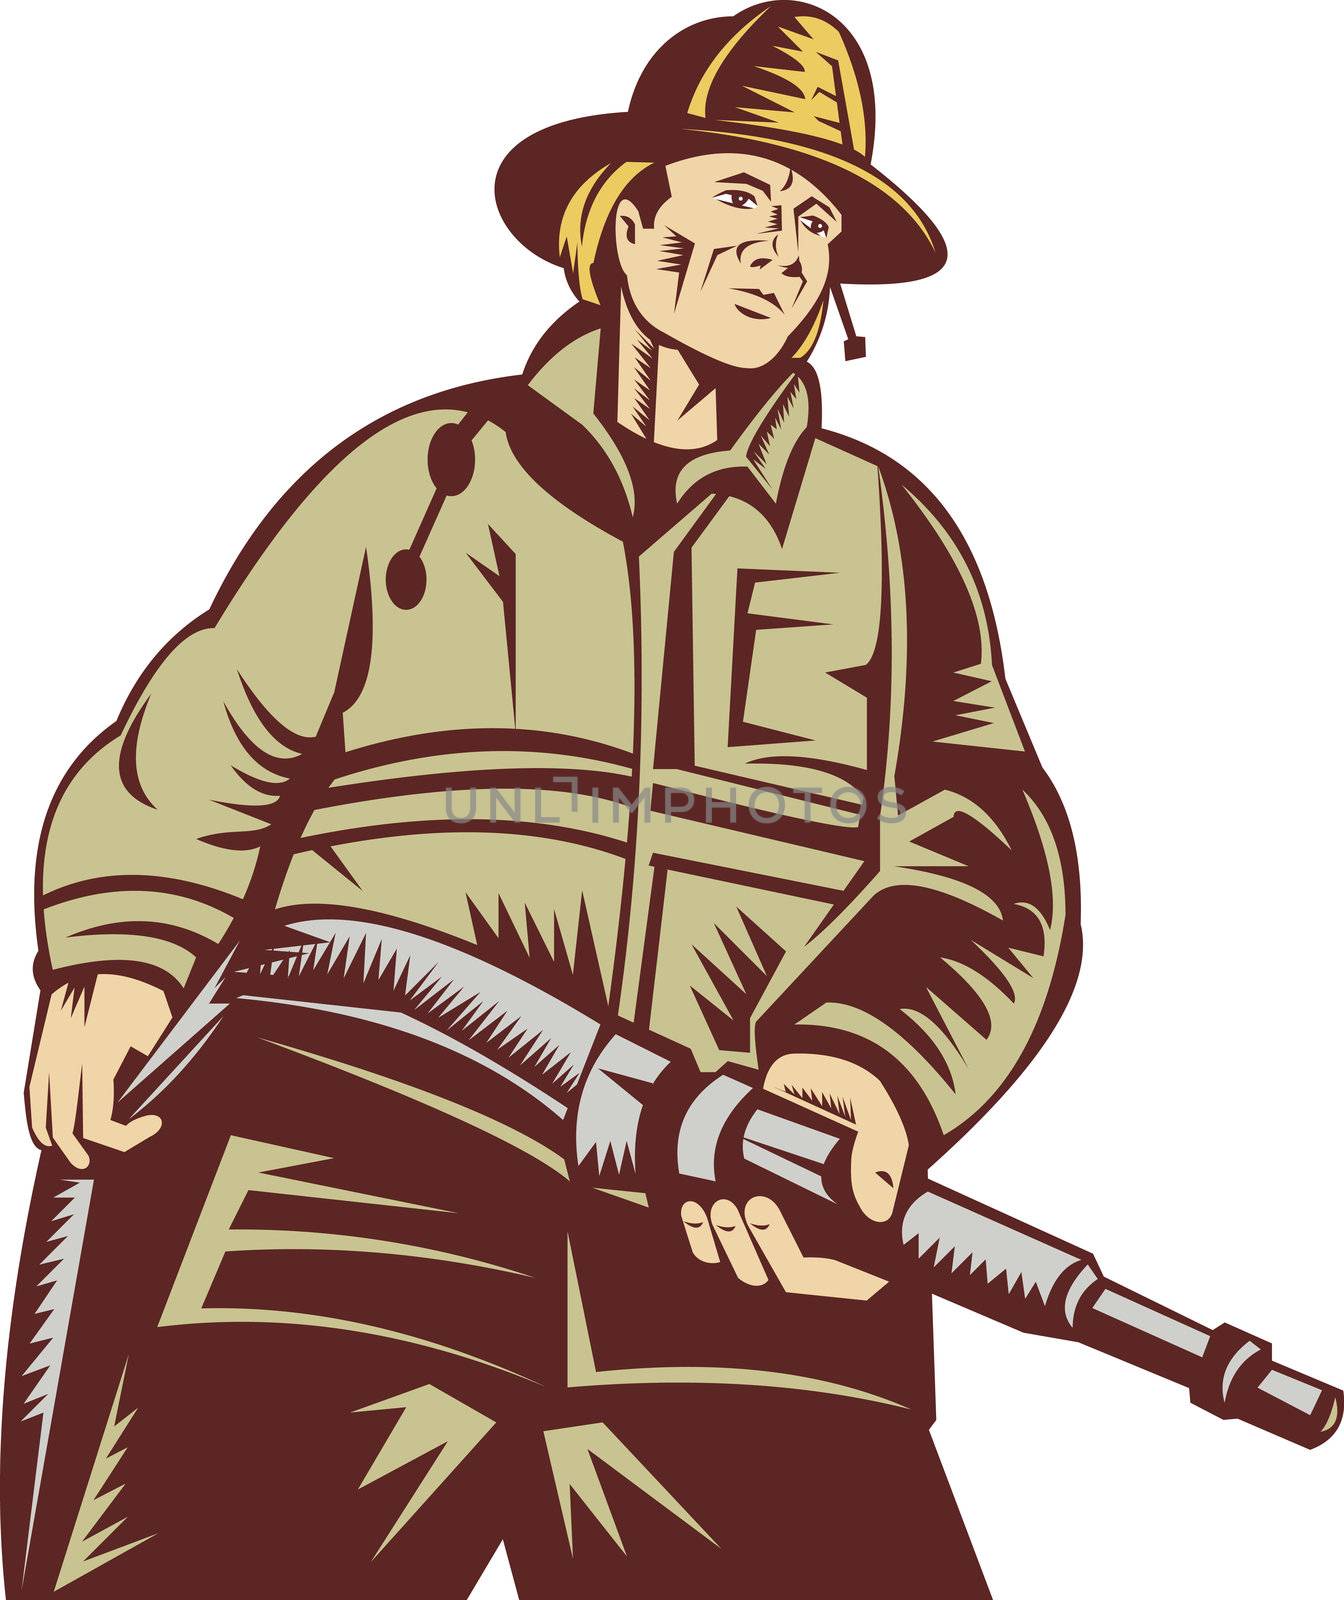 Firefighter carrying a hose by patrimonio